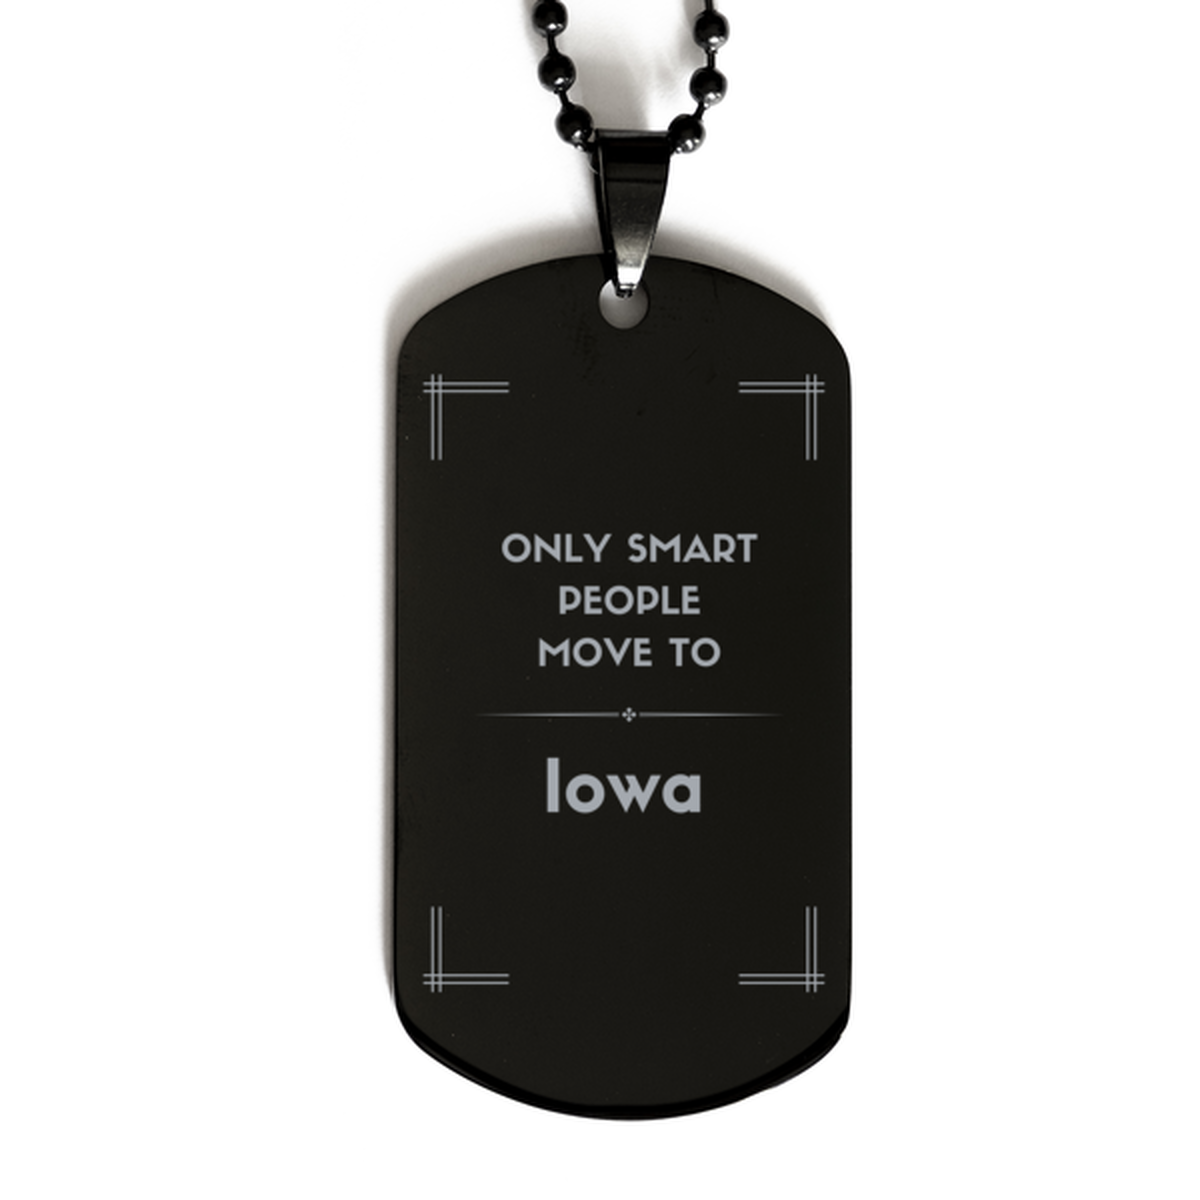 Only smart people move to Iowa Black Dog Tag, Gag Gifts For Iowa, Move to Iowa Gifts for Friends Coworker Funny Saying Quote